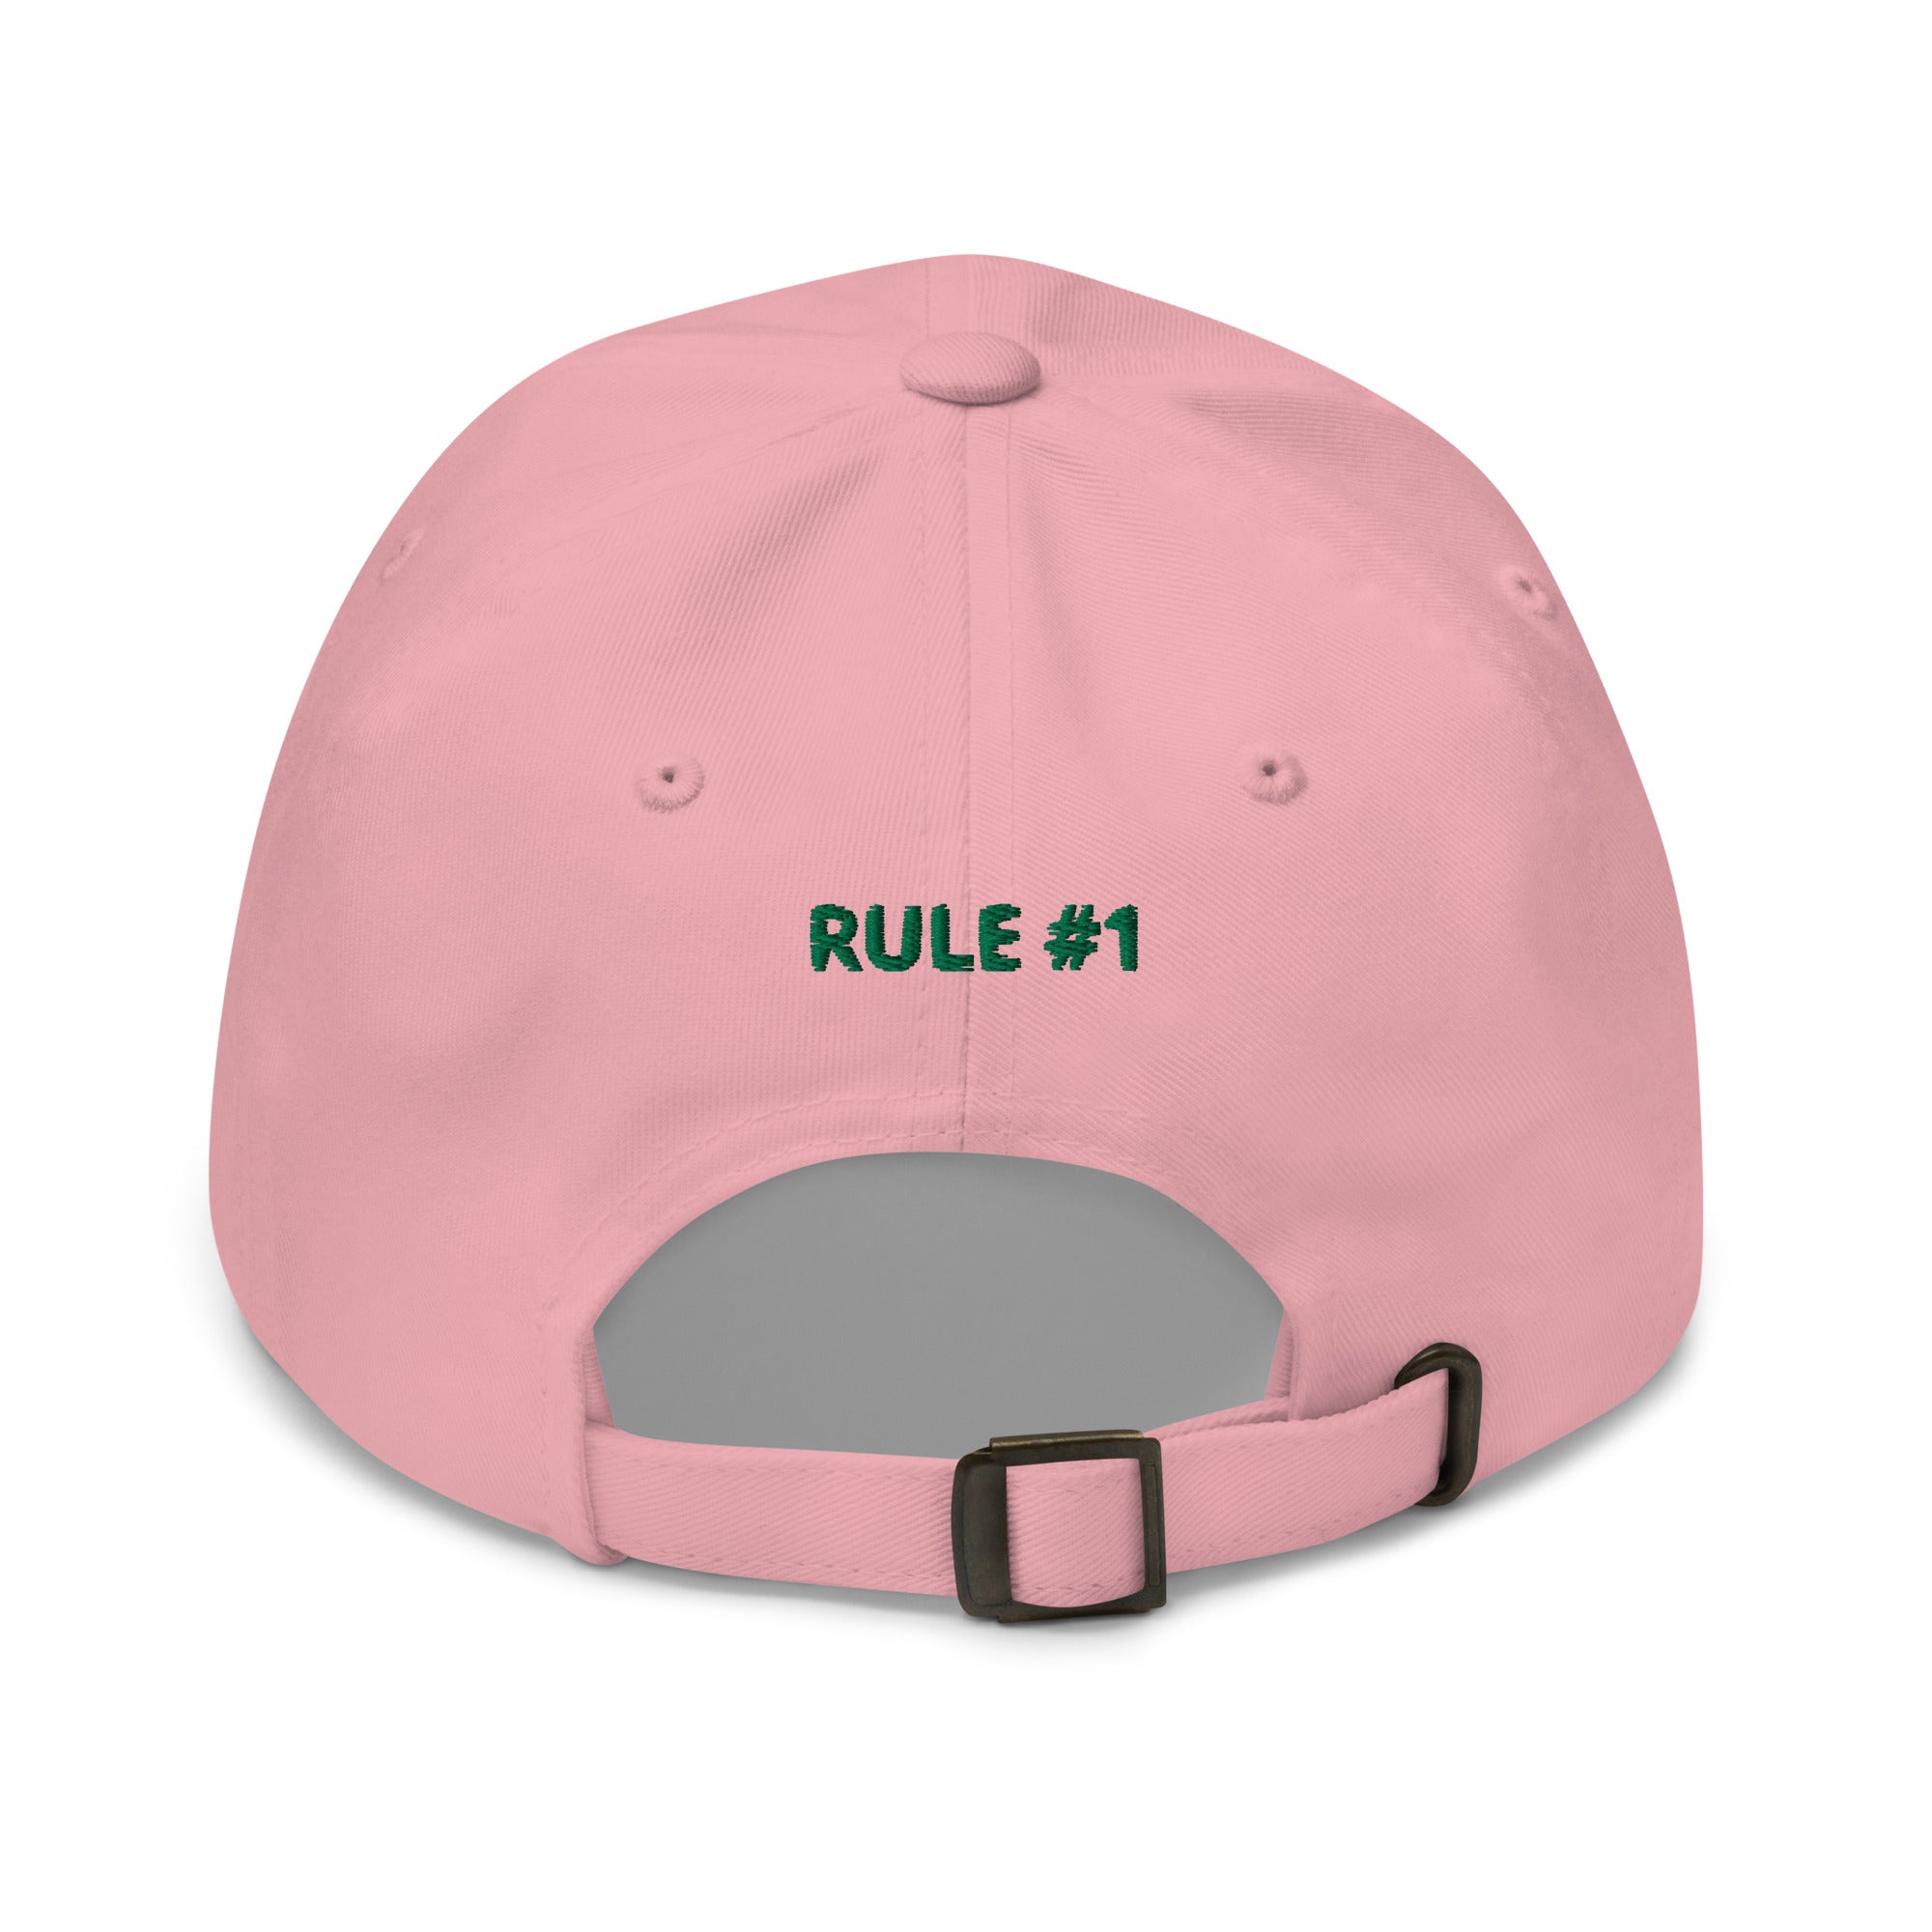 Pretty Girls Means No Boys Allowed Hat